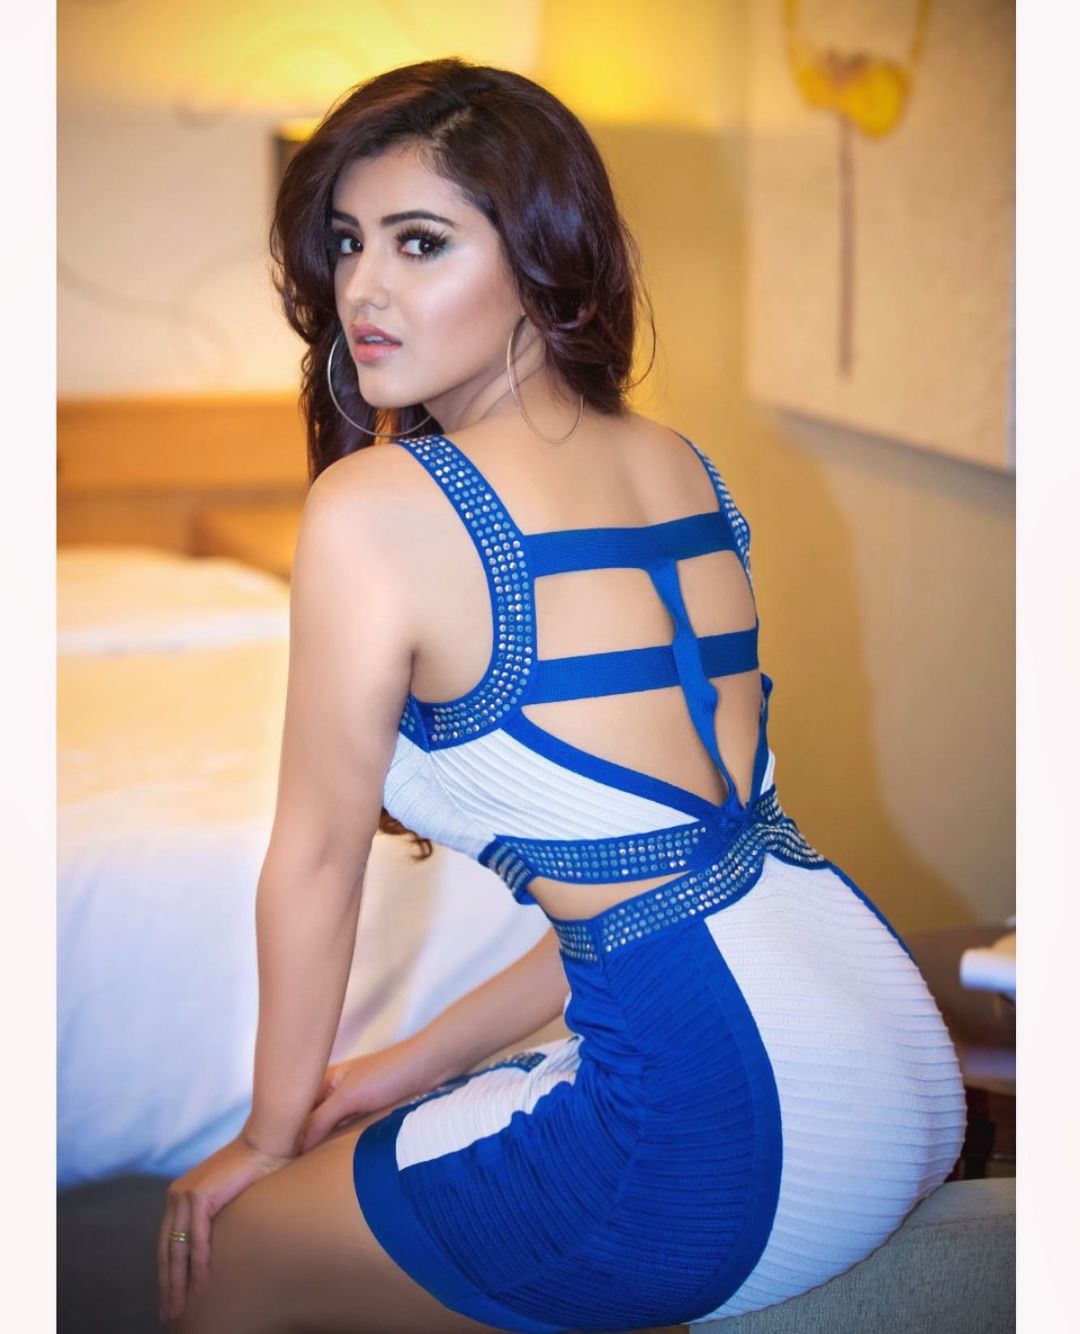 Malvika Sharma Instagram, Facebook, Age, Biography, Body Measurements, Movies, Pictures, Boyfriend, and Early Life